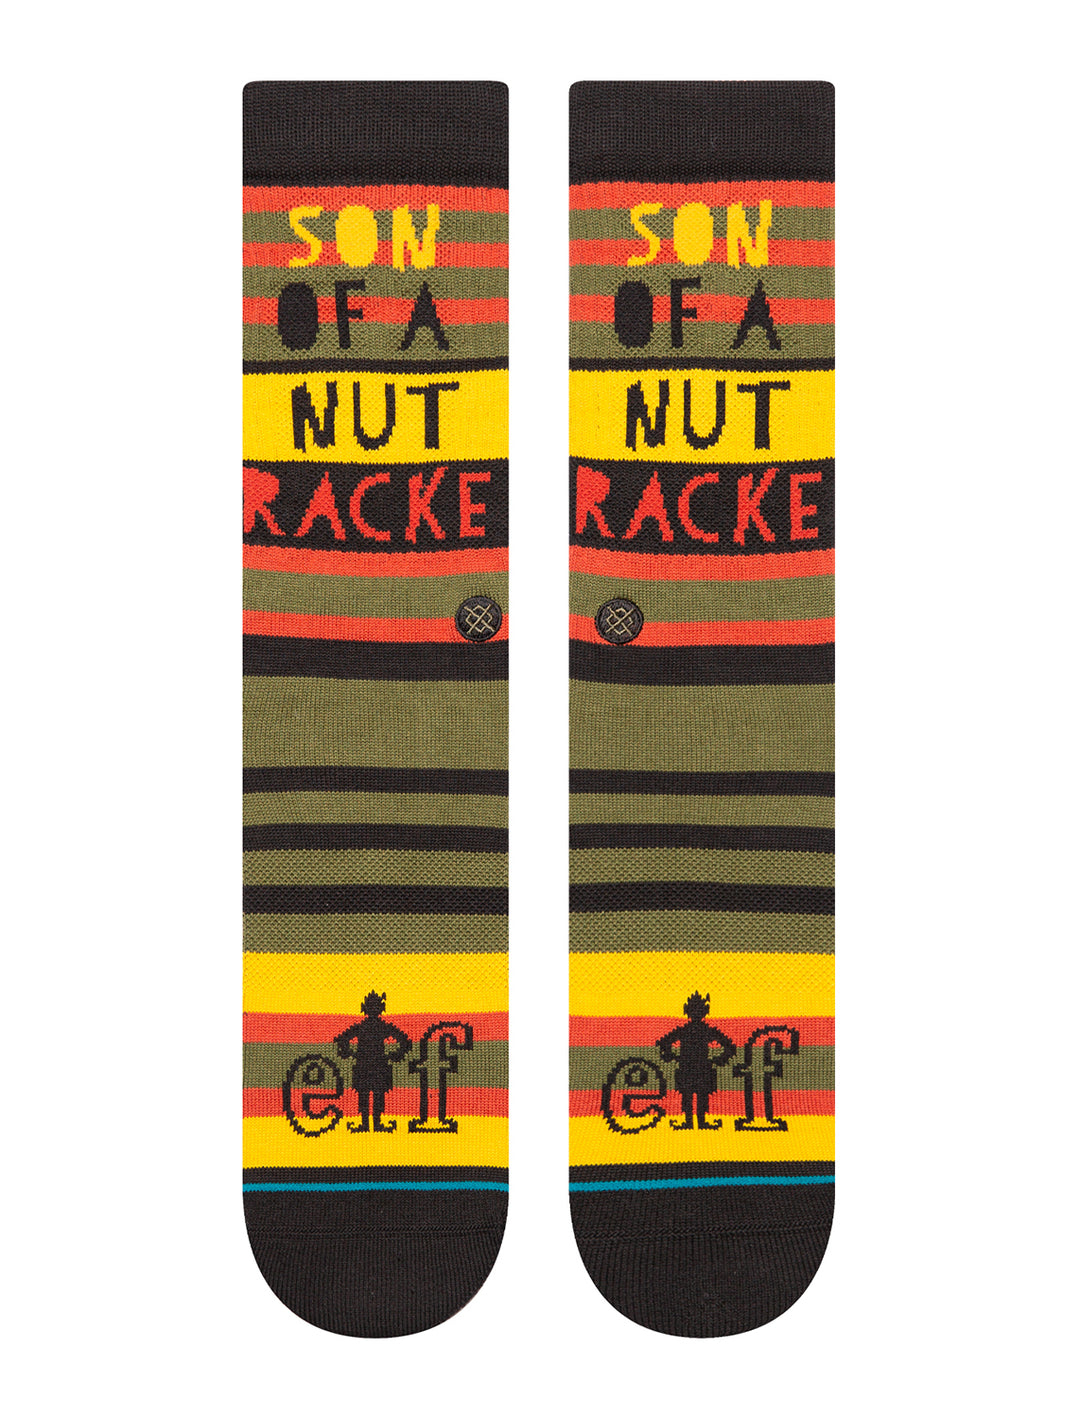 Front view of Stance's elf - son of a nutcracker socks.